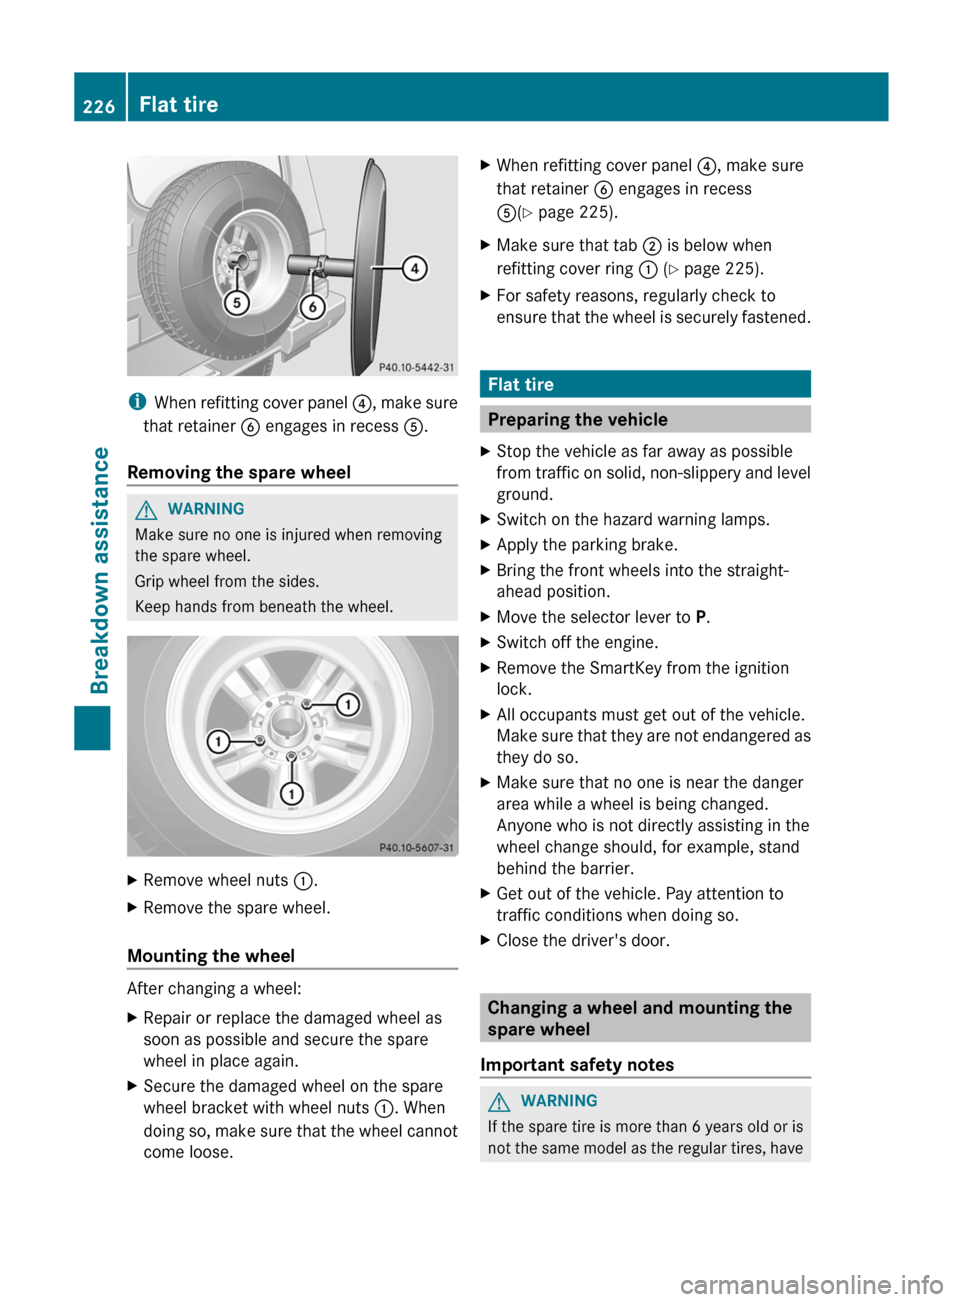 MERCEDES-BENZ G-Class 2012 W463 Owners Guide i
When  refitting 
cover panel ?, make sure
that retainer  B engages in recess A.
Removing the spare wheel G
WARNING
Make sure no one is injured when removing
the spare wheel.
Grip wheel from the side